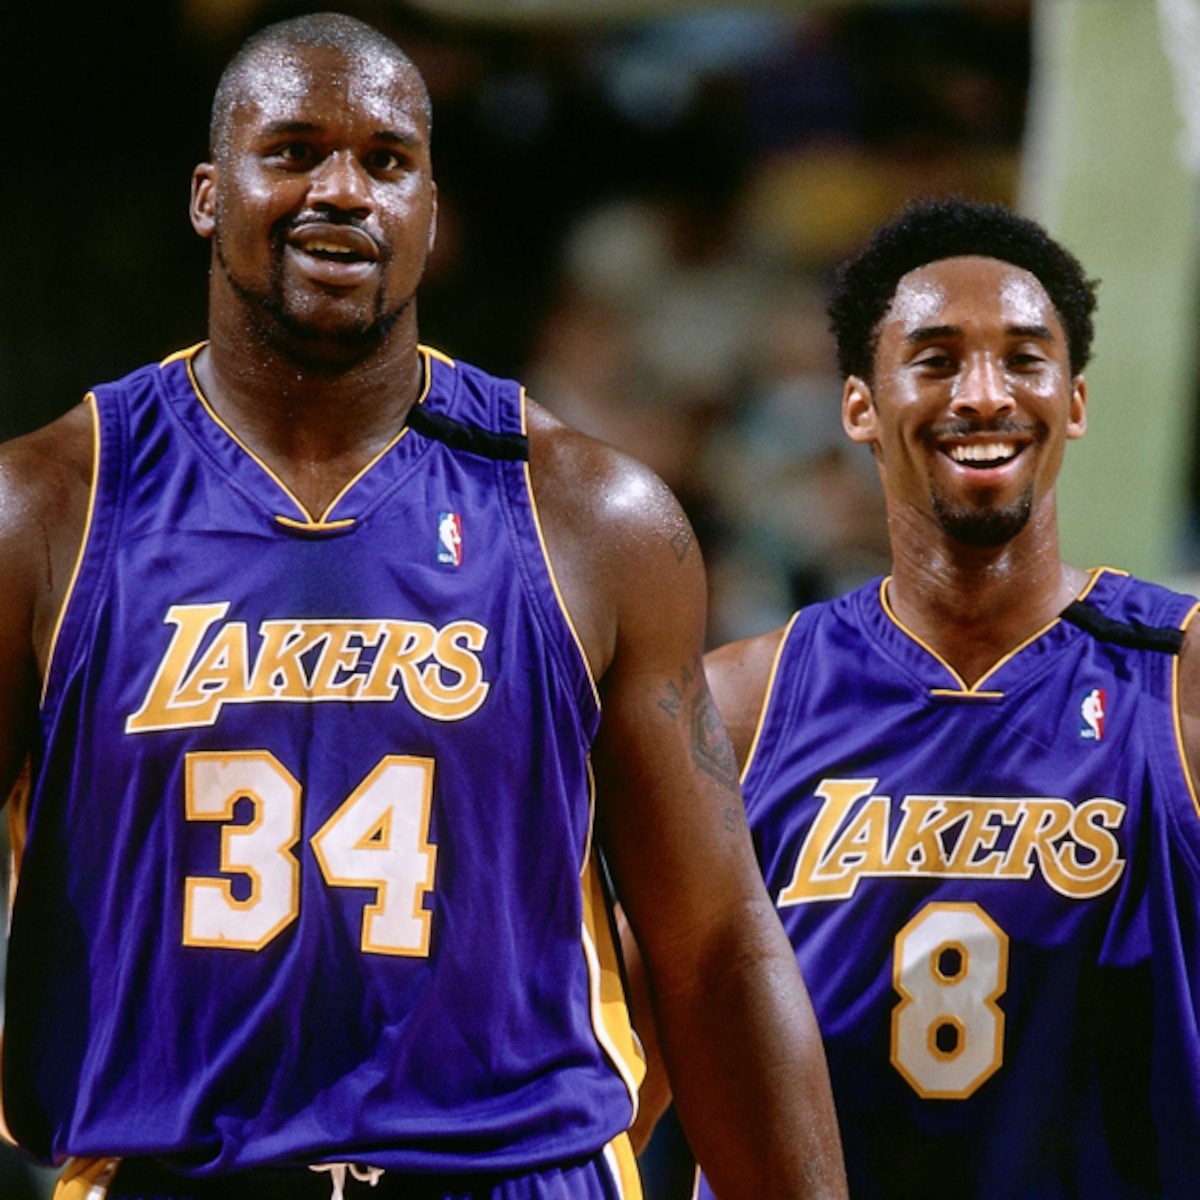 rs_600x600-200127184244-600-lakers-shaquille-oneal-kobe-bryant.jpg